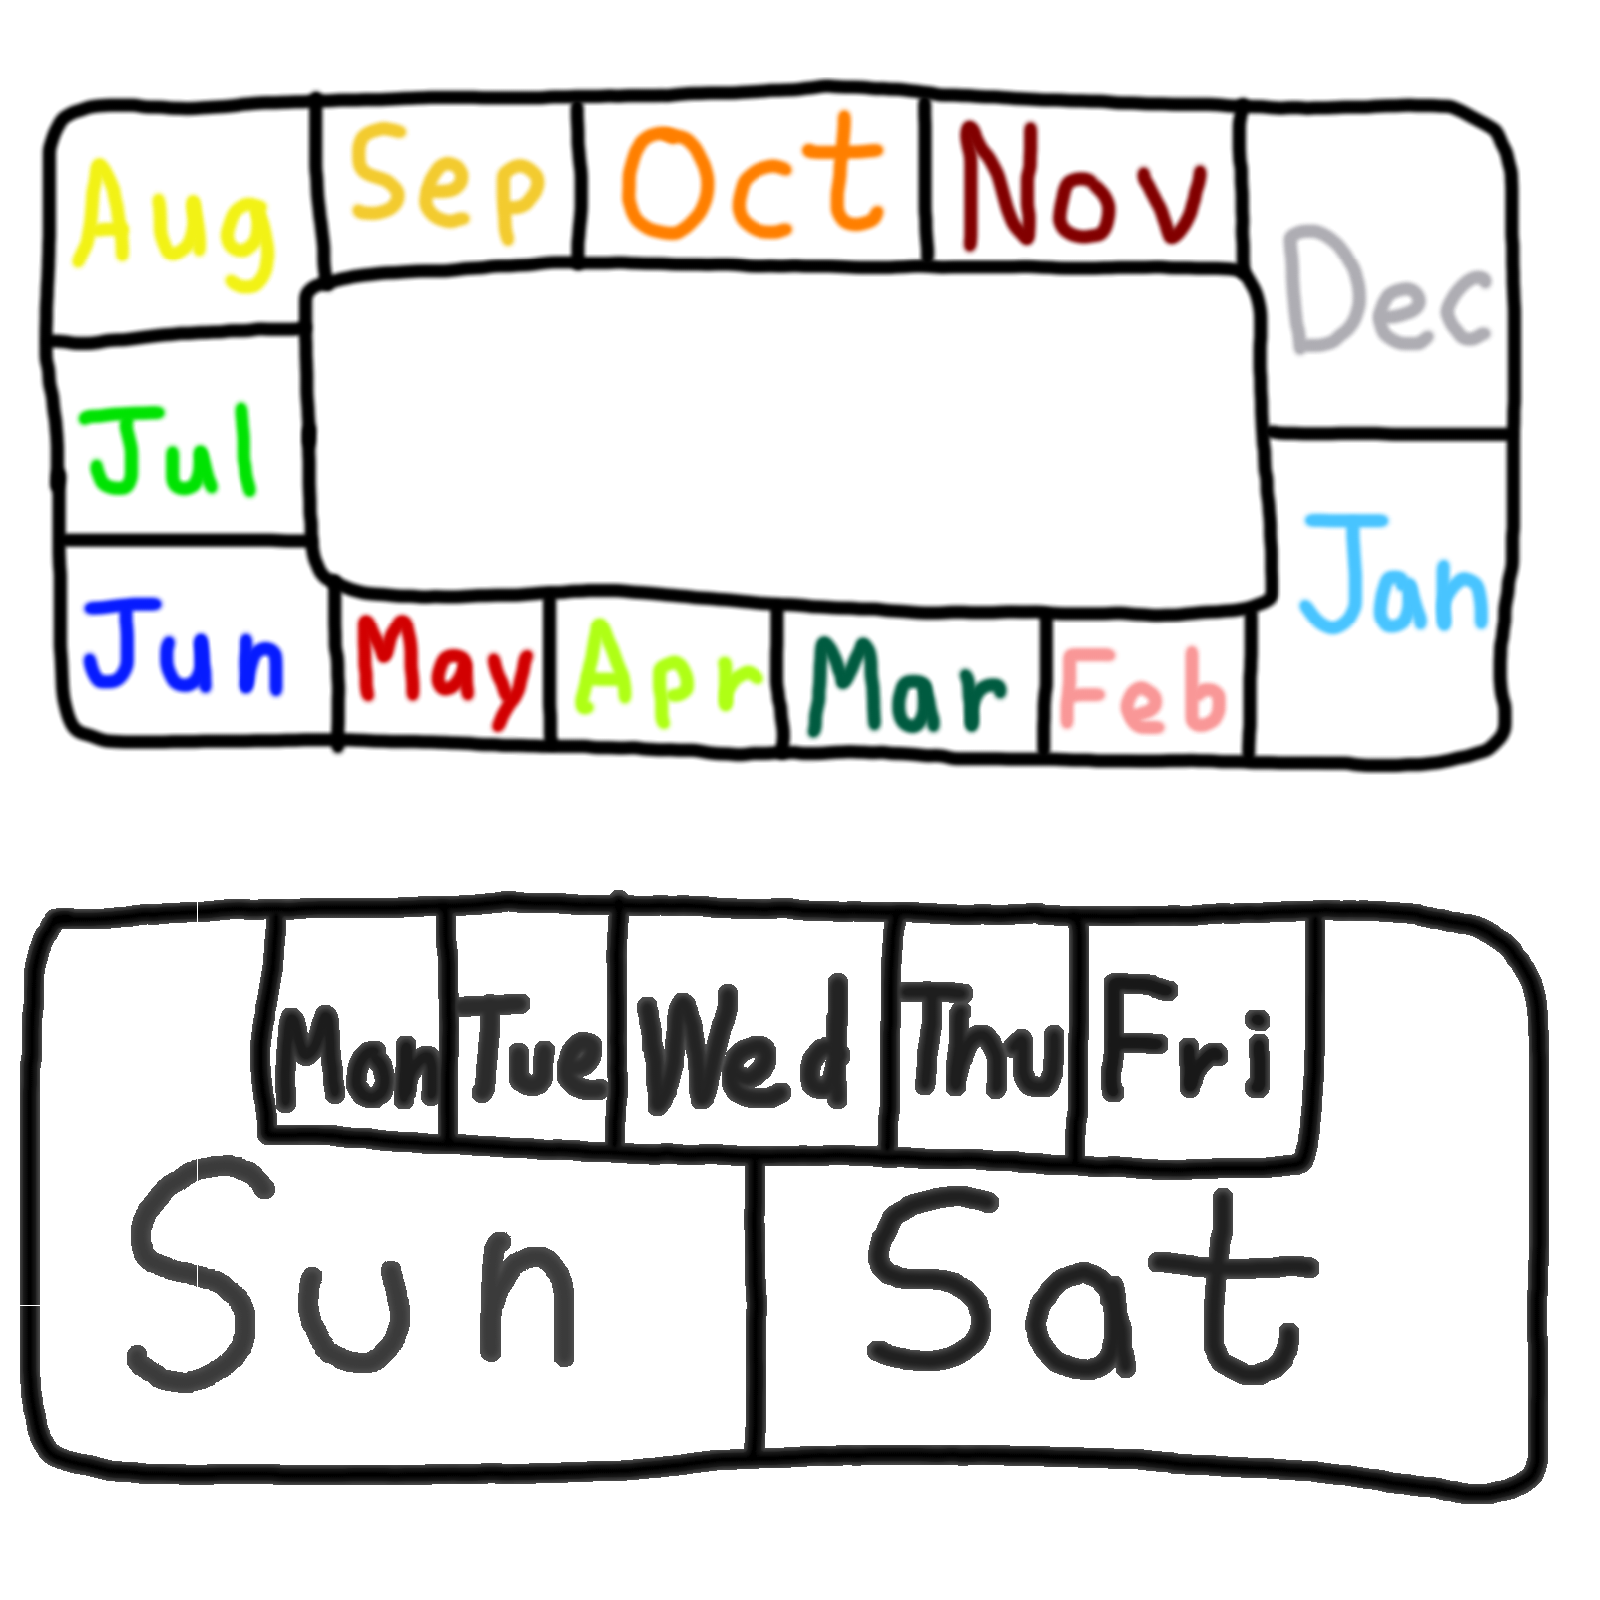 Months of the Year and Days of the Week.png